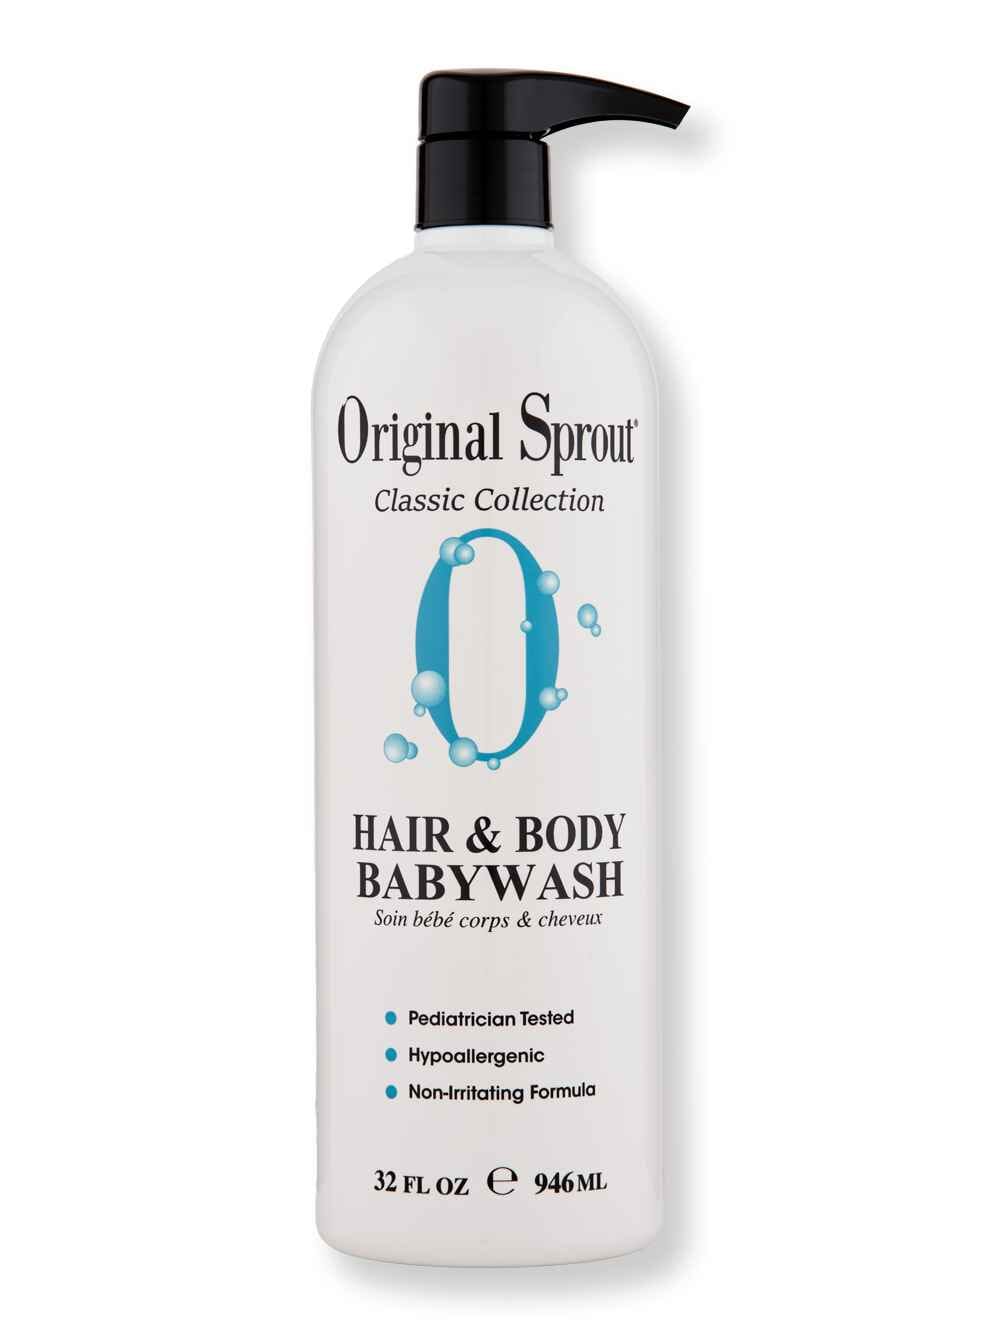 Original Sprout Original Sprout Hair & Body Baby Wash 33 oz Baby Shampoos & Washes 